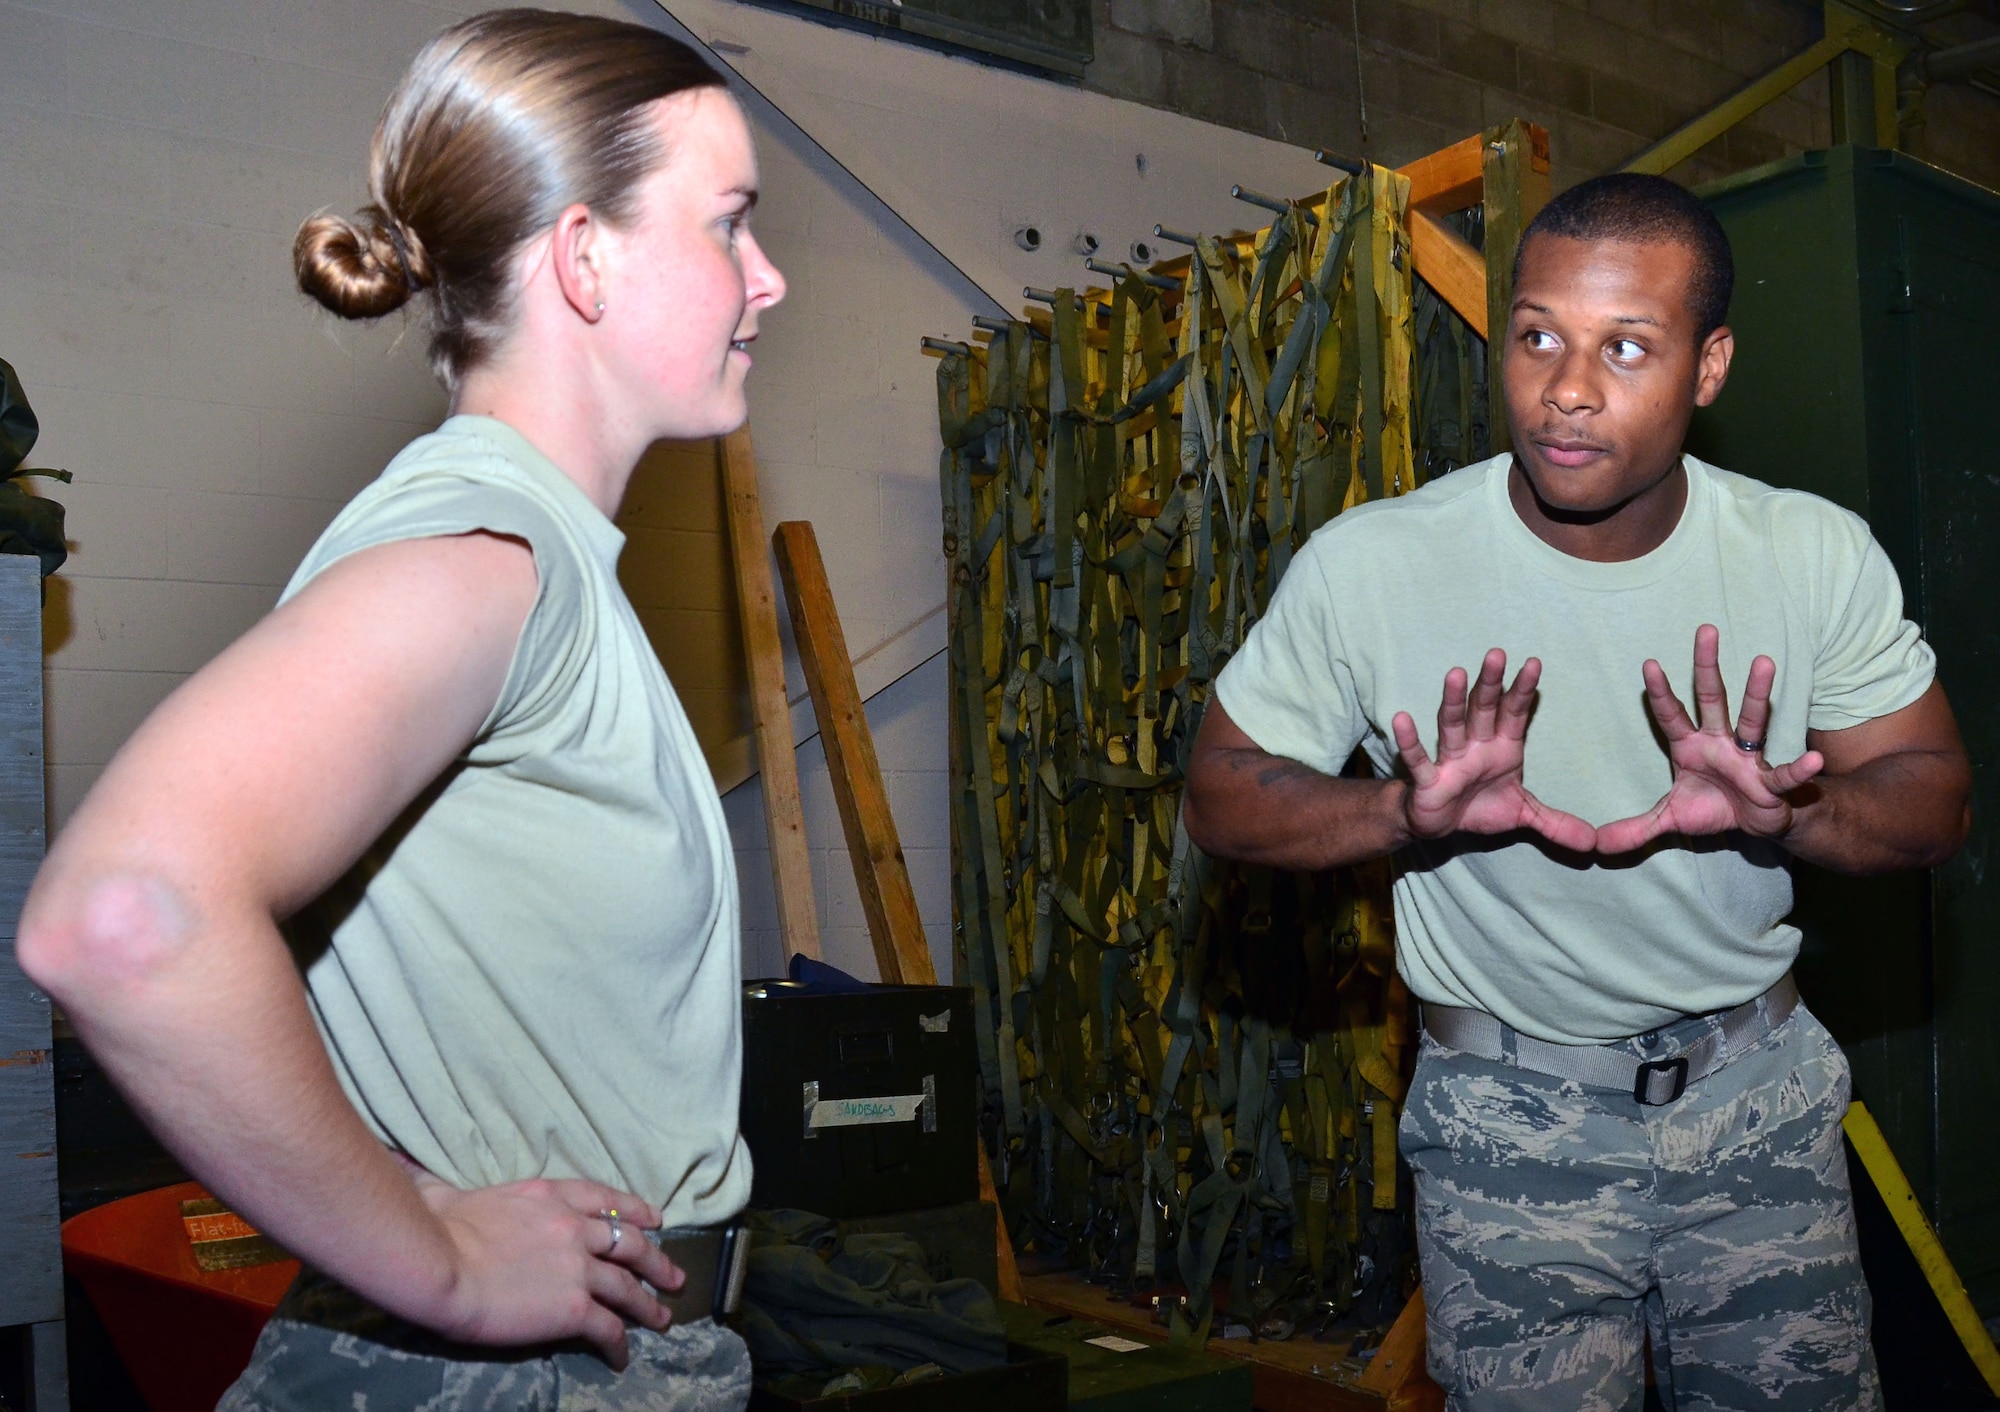 WRIGHT-PATTERSON AIR FORCE BASE, Ohio - Staff Sgt Dawn Gettys, 445th Security Forces Squadron, learns new combative techniques from Staff Sgt. Dorian White, 445 SFS, during the July 13 unit training assembly. This training is specifically for SFS and is different from Army and Air Force combative training. (U.S. Air Force photo/Staff Sgt. Amanda Duncan)
